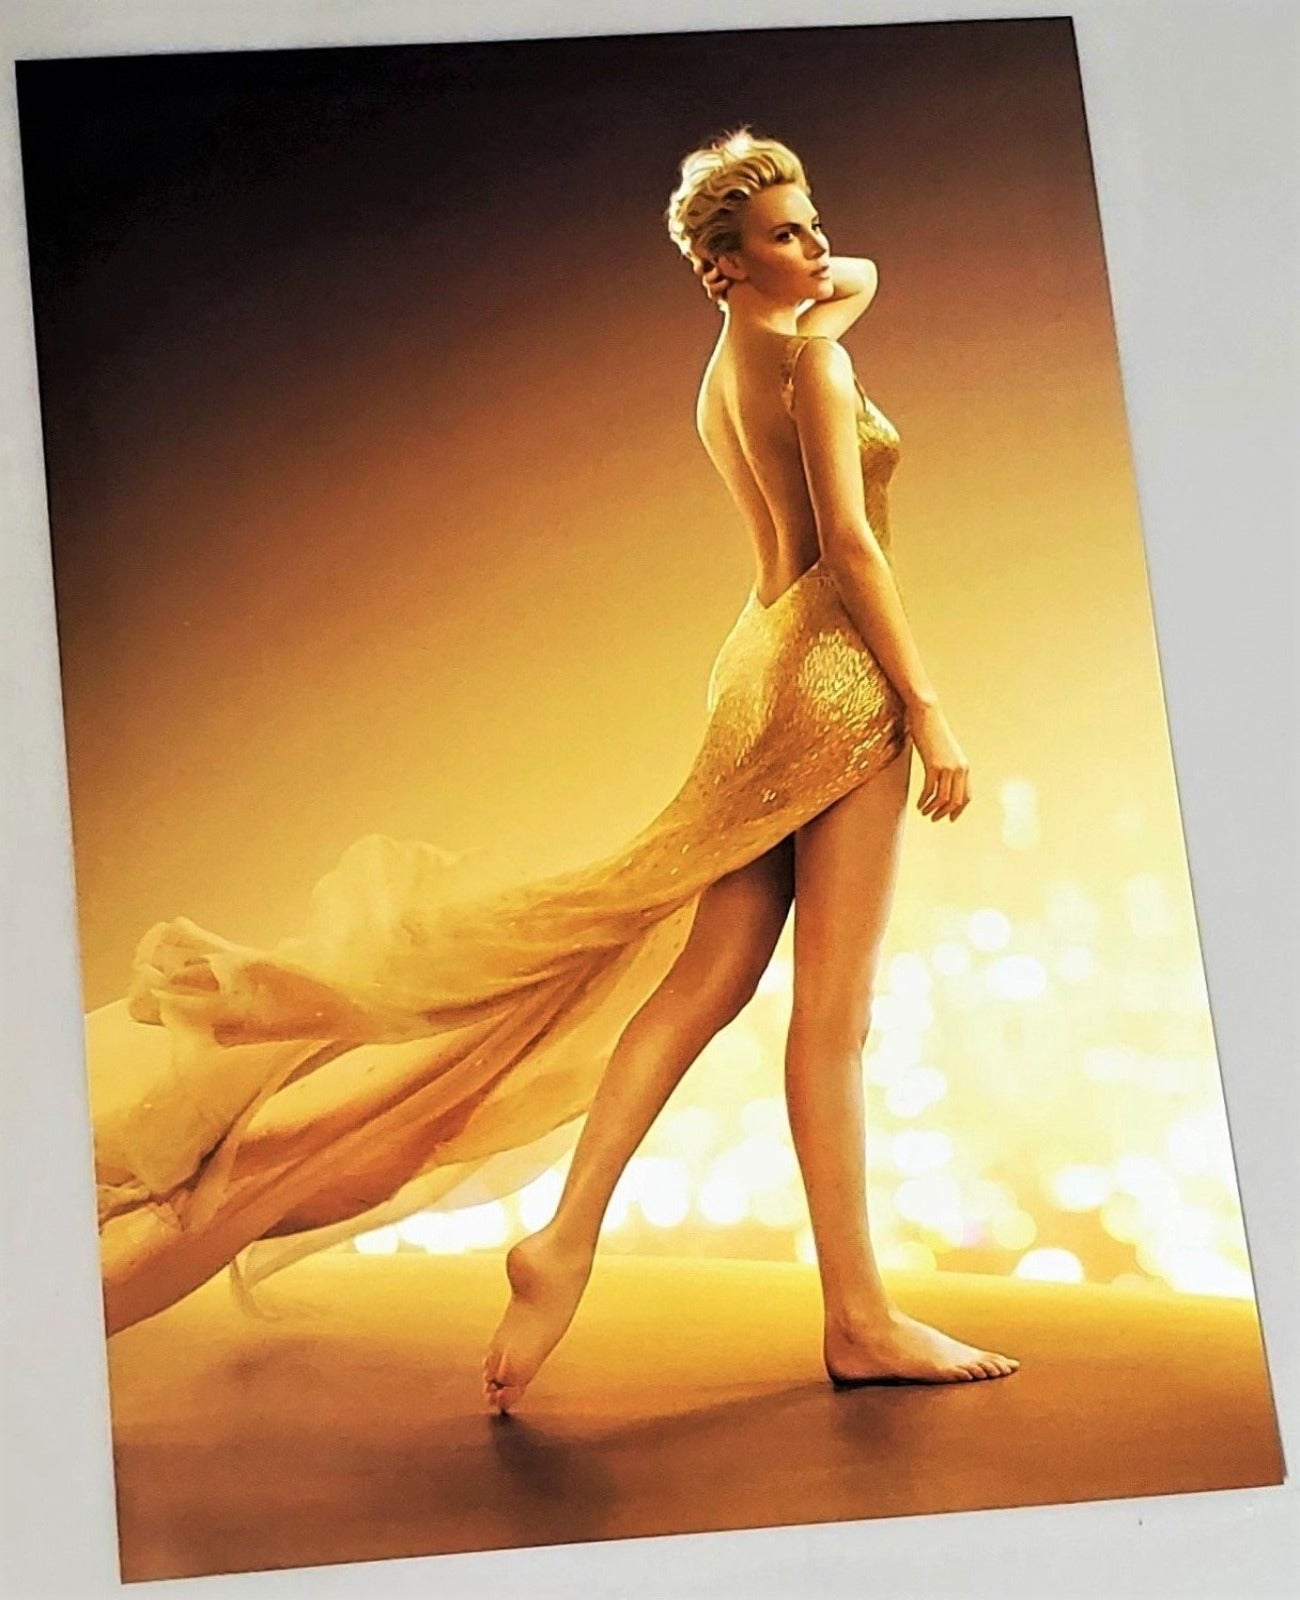 Glossy Charlize Theron for J'adore photograph advertisement page featured in September 2016  Vogue magazine available in area51gallery